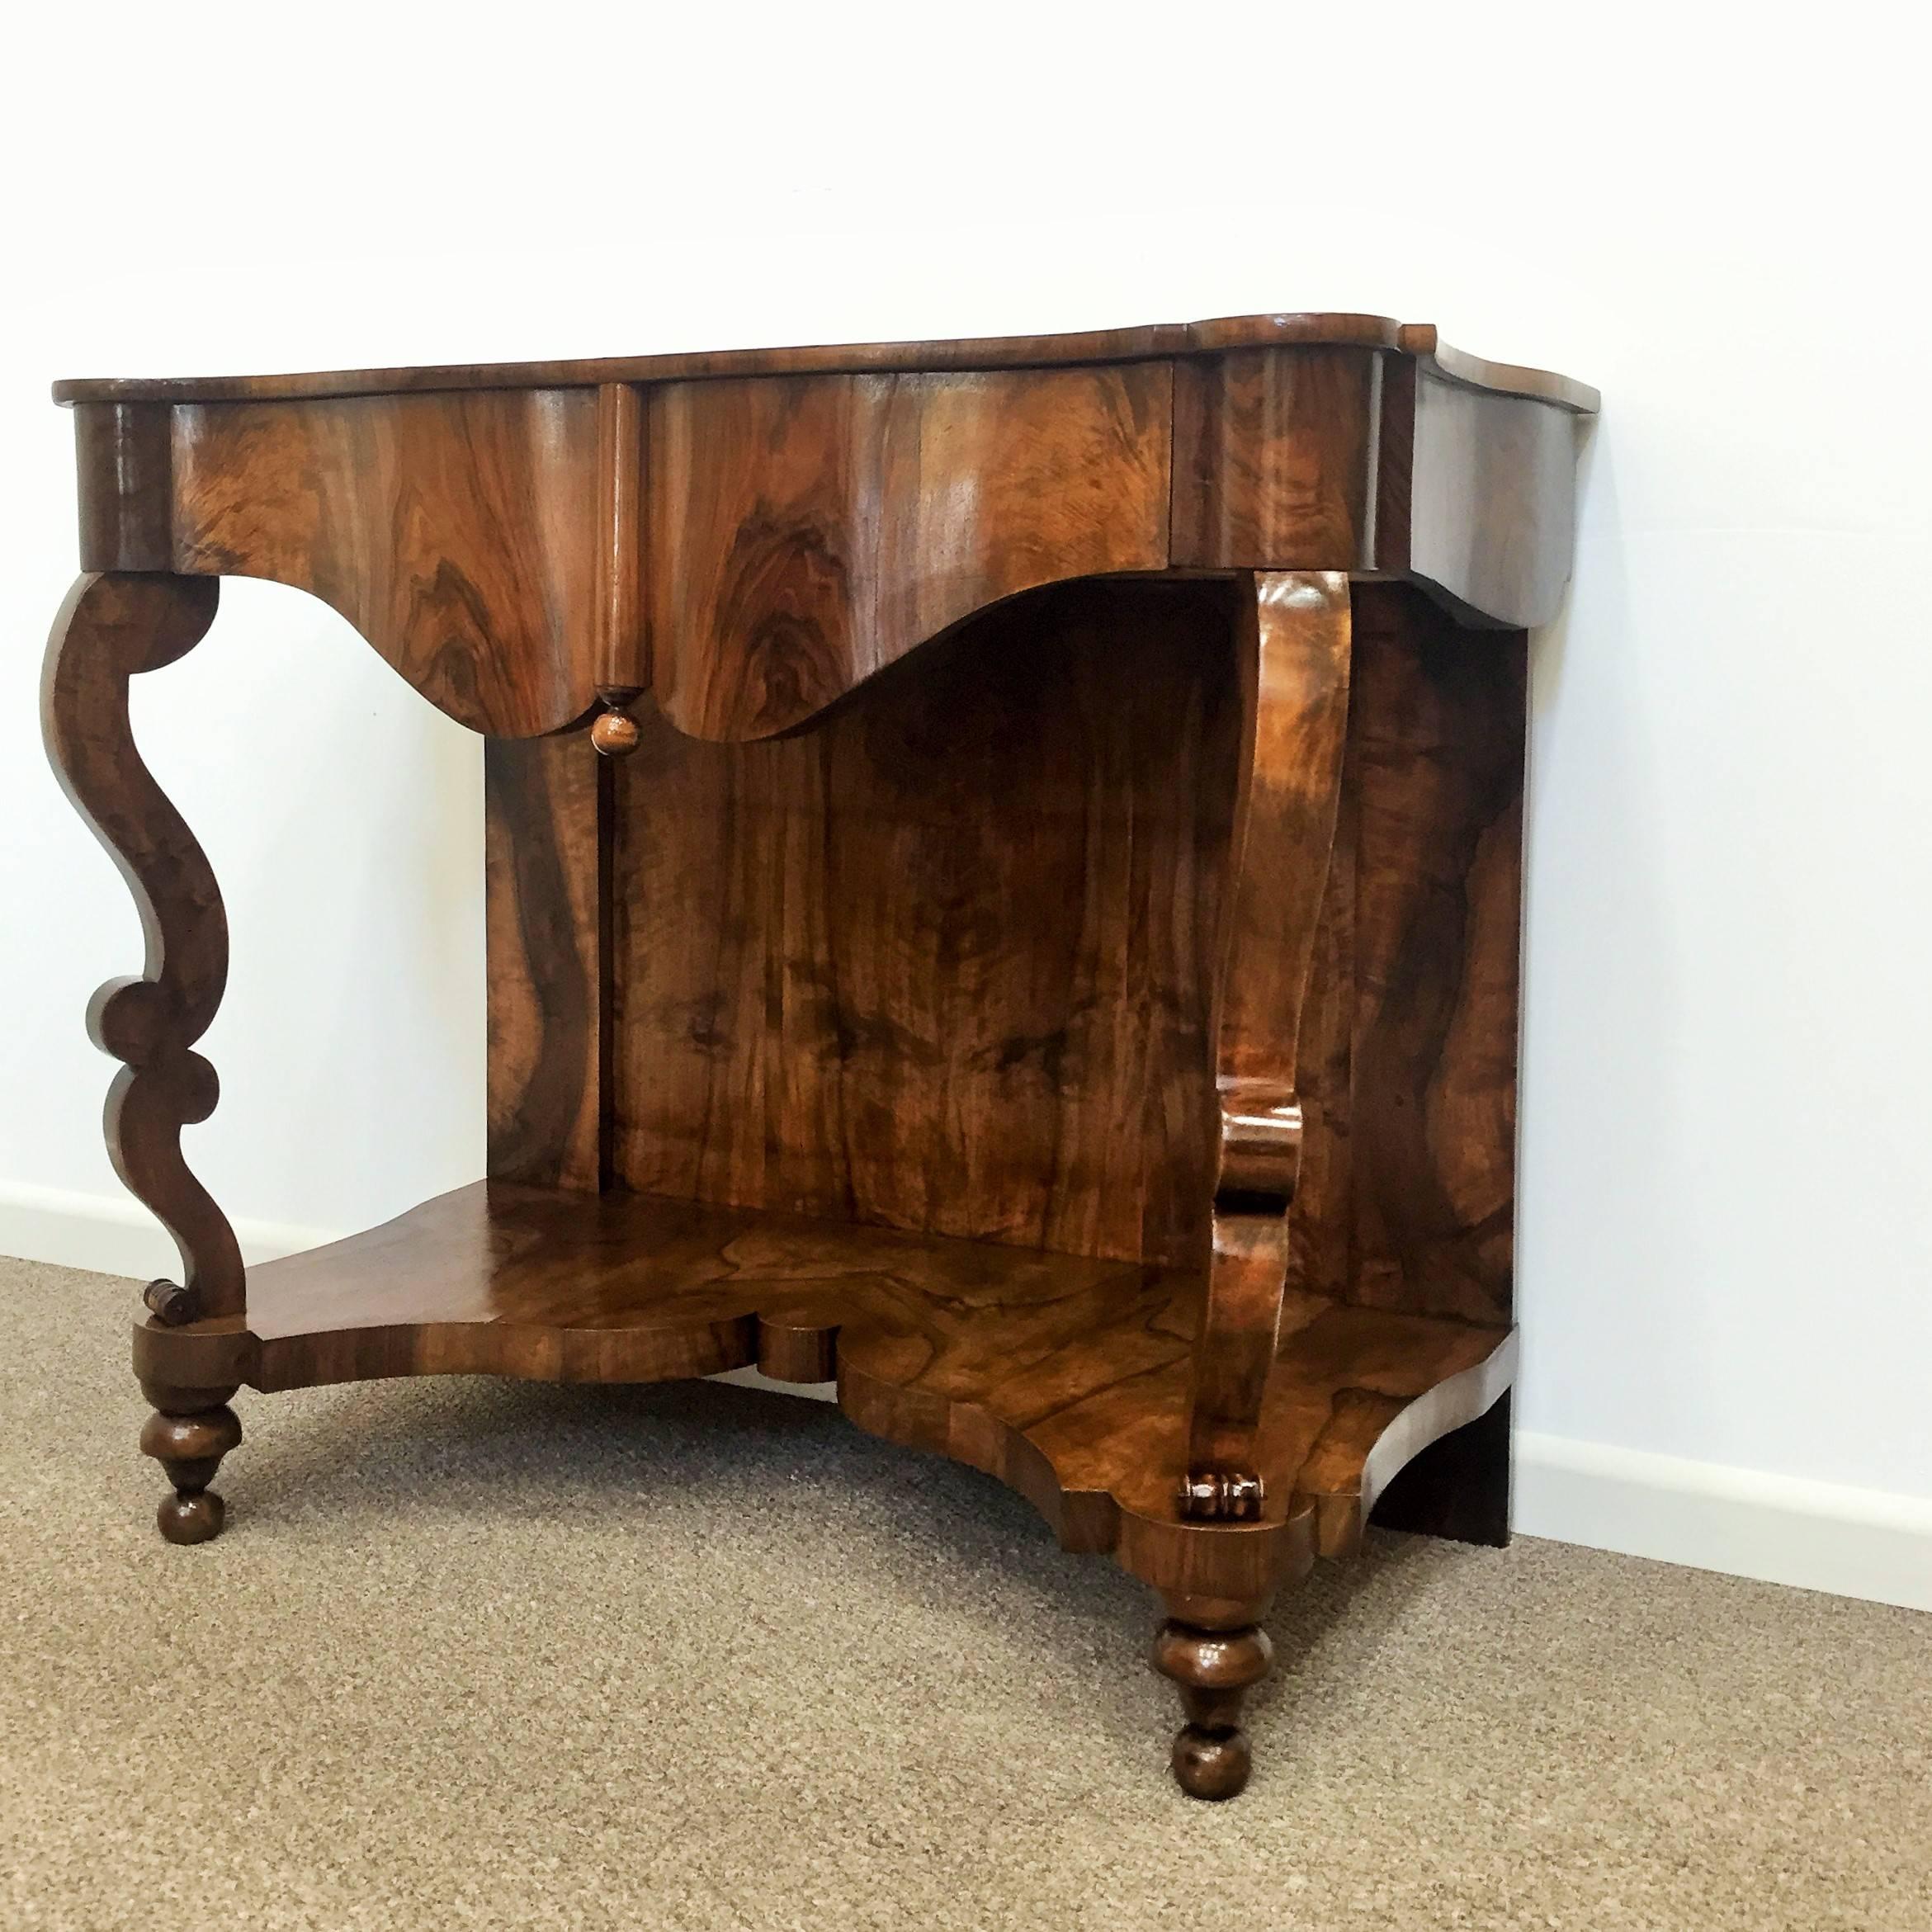 This very rare Biedermeier wall console was manufactured circa 1830 in Austria and features a hidden drawer which adds a sophisticated touch to its mysterious allure. A rare “one of a kind” piece!